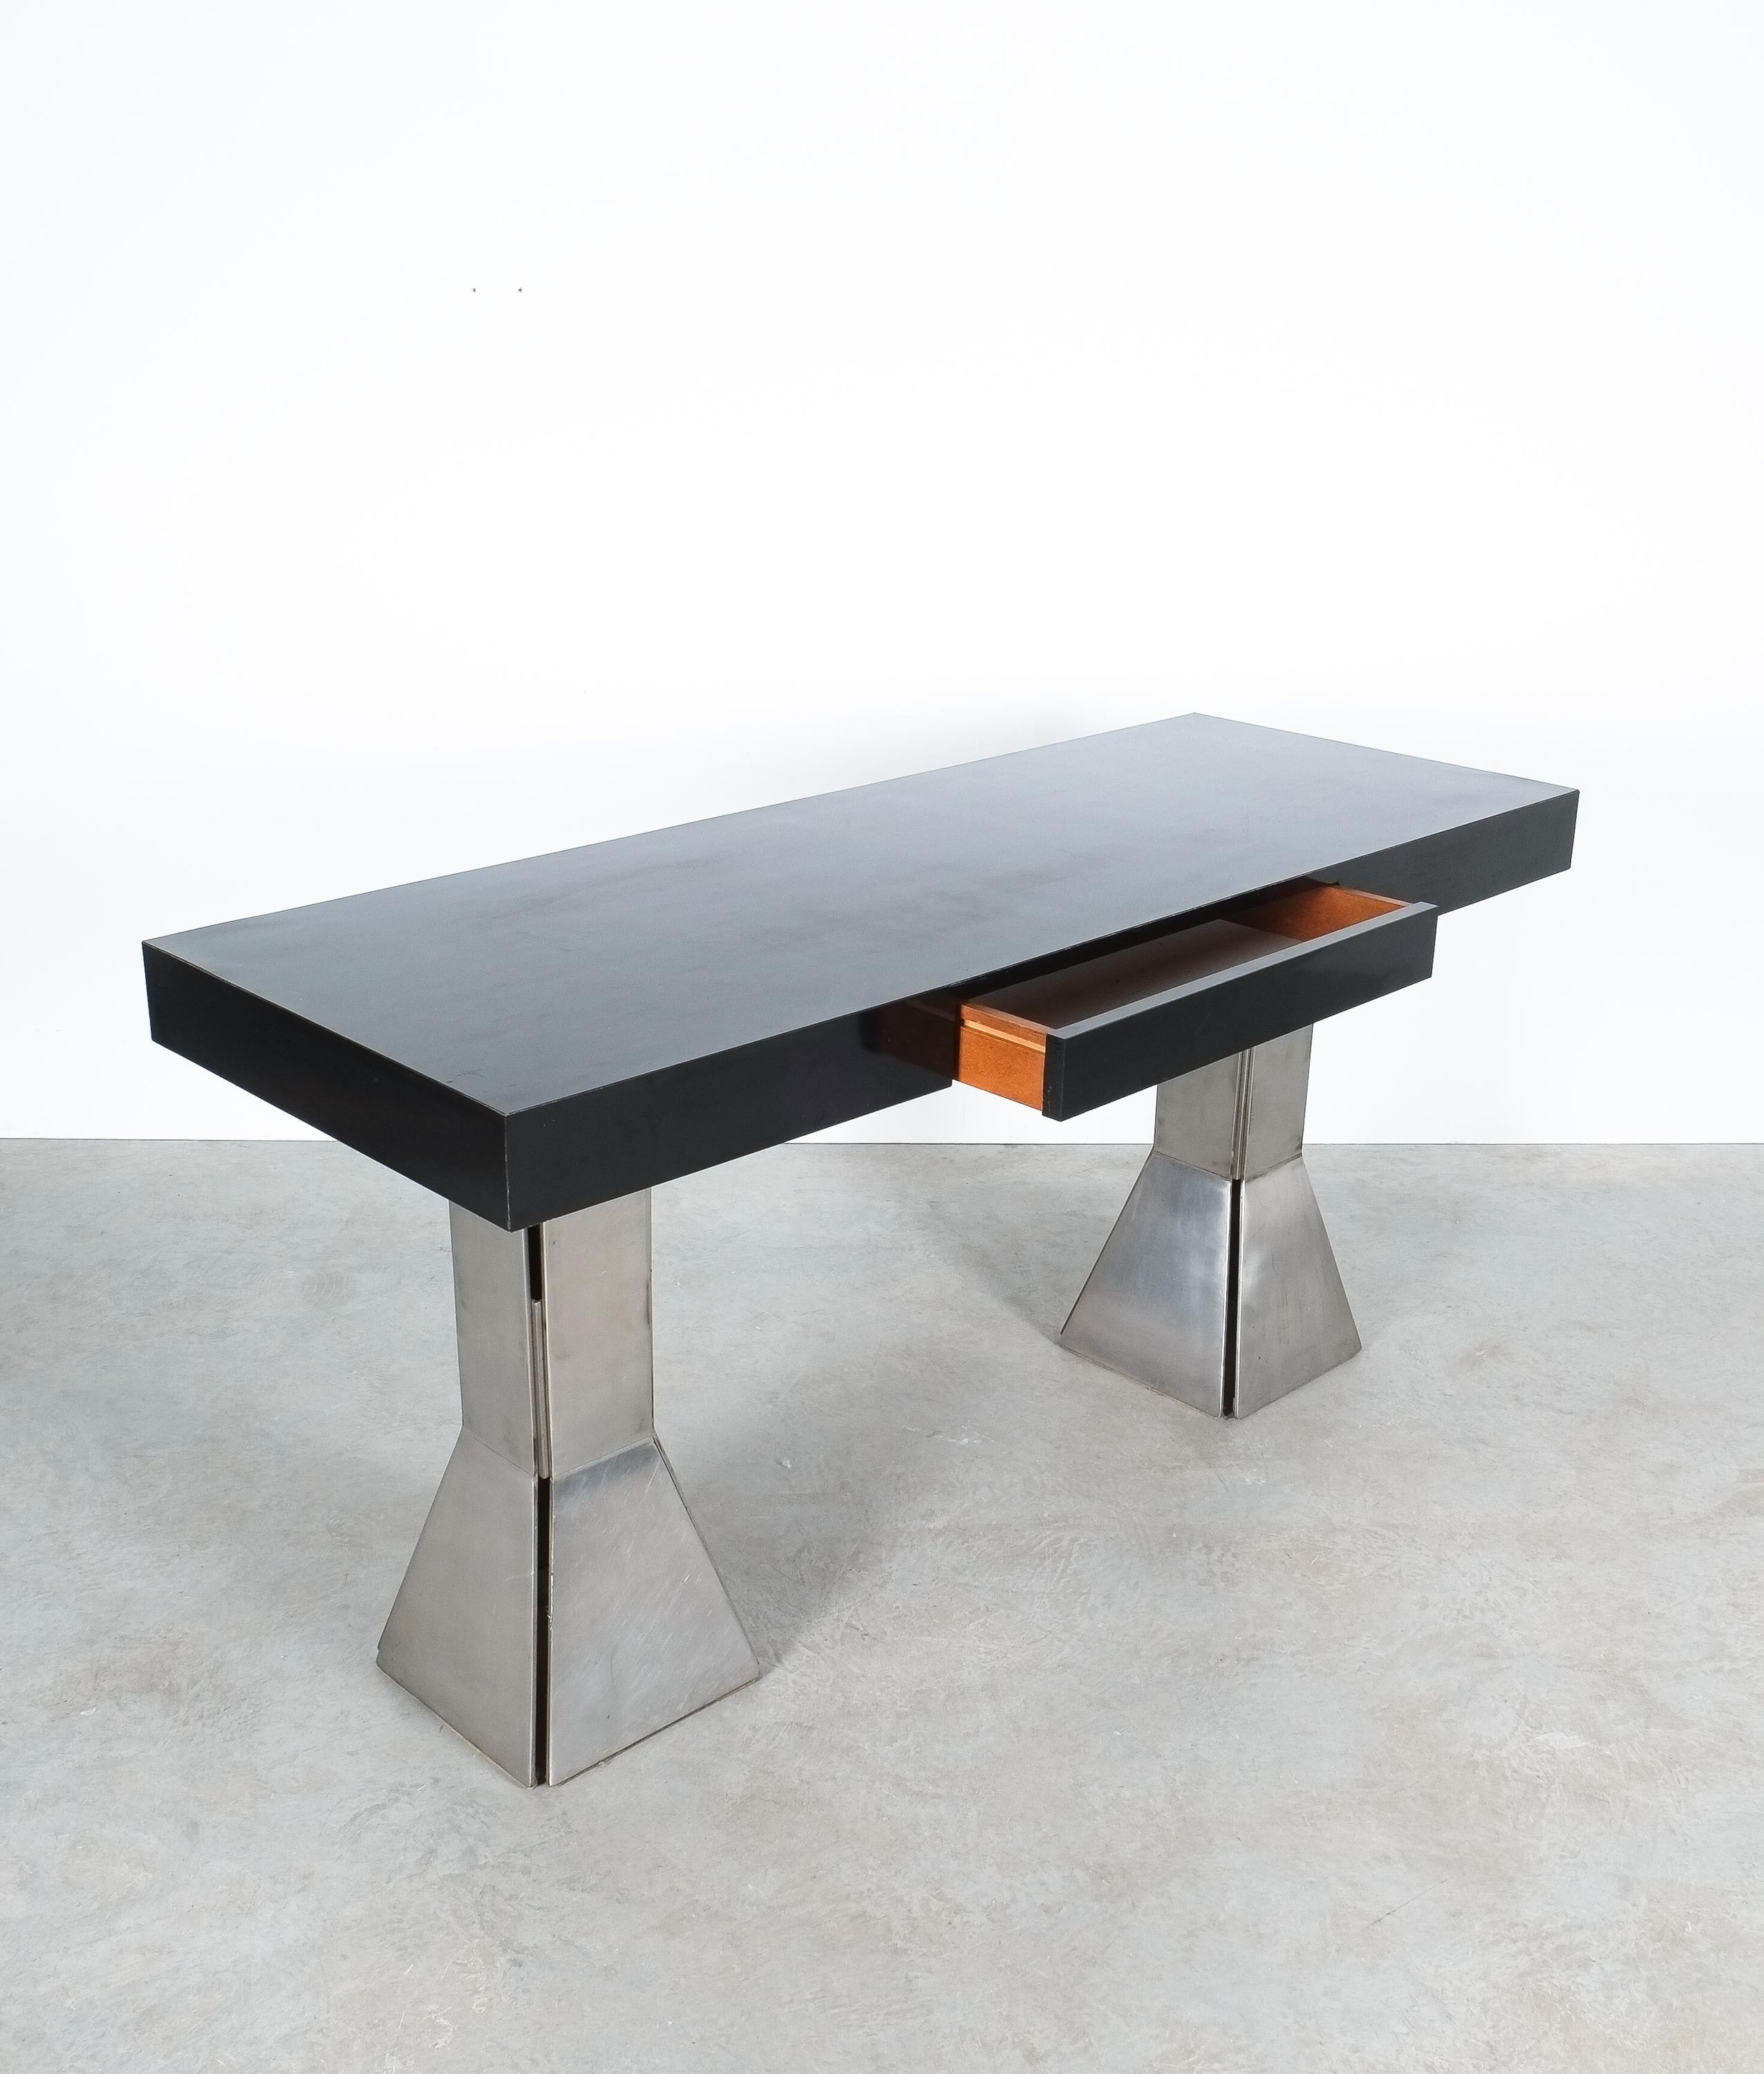 Late 20th Century Console Table or Desk In Formica Stainless Steel, Italy